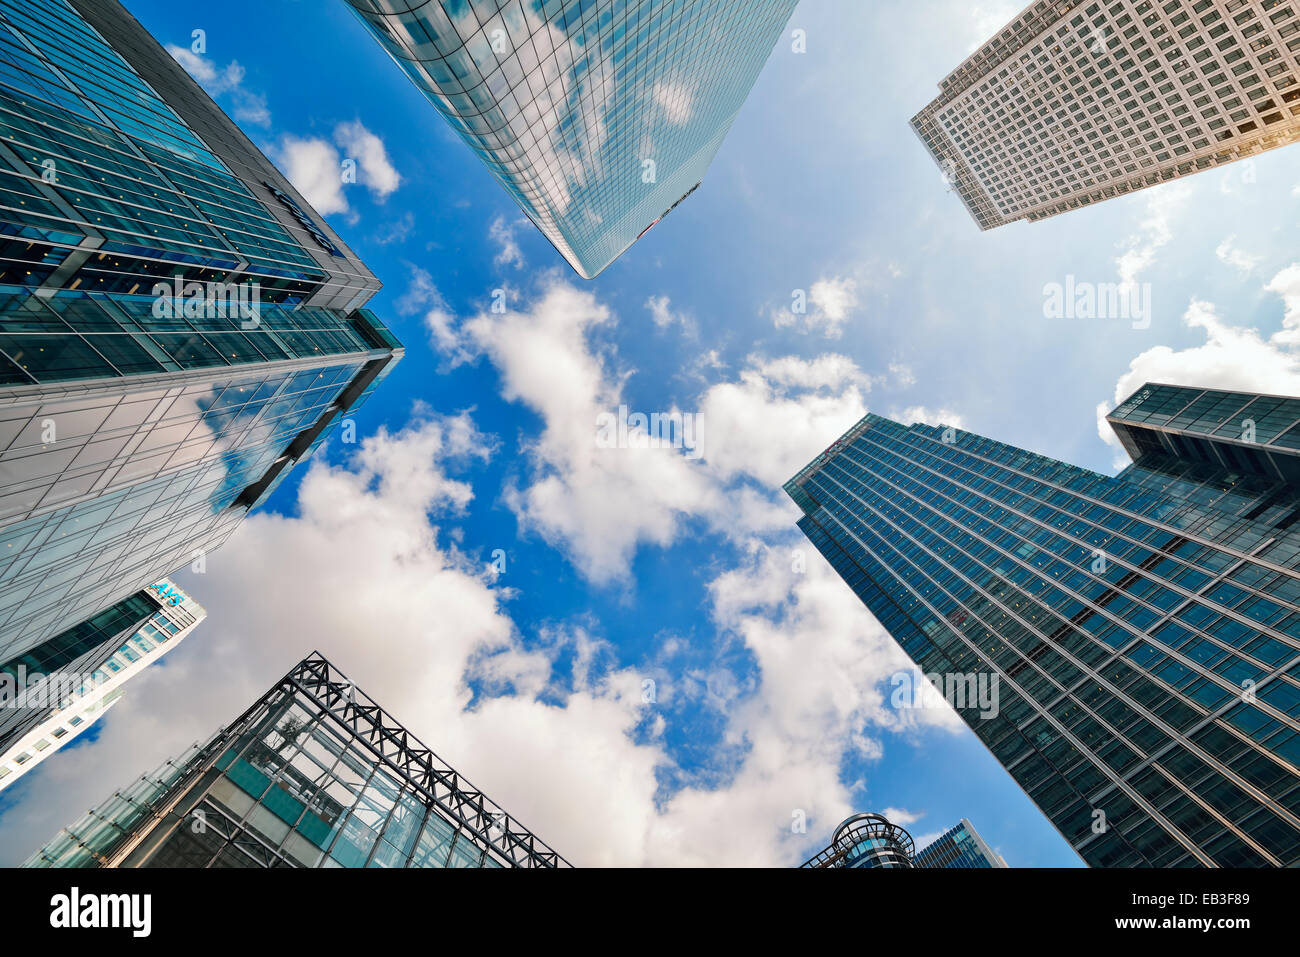 Canary Wharf, Low Angle. Londres, Angleterre, Royaume-Uni. Banque D'Images